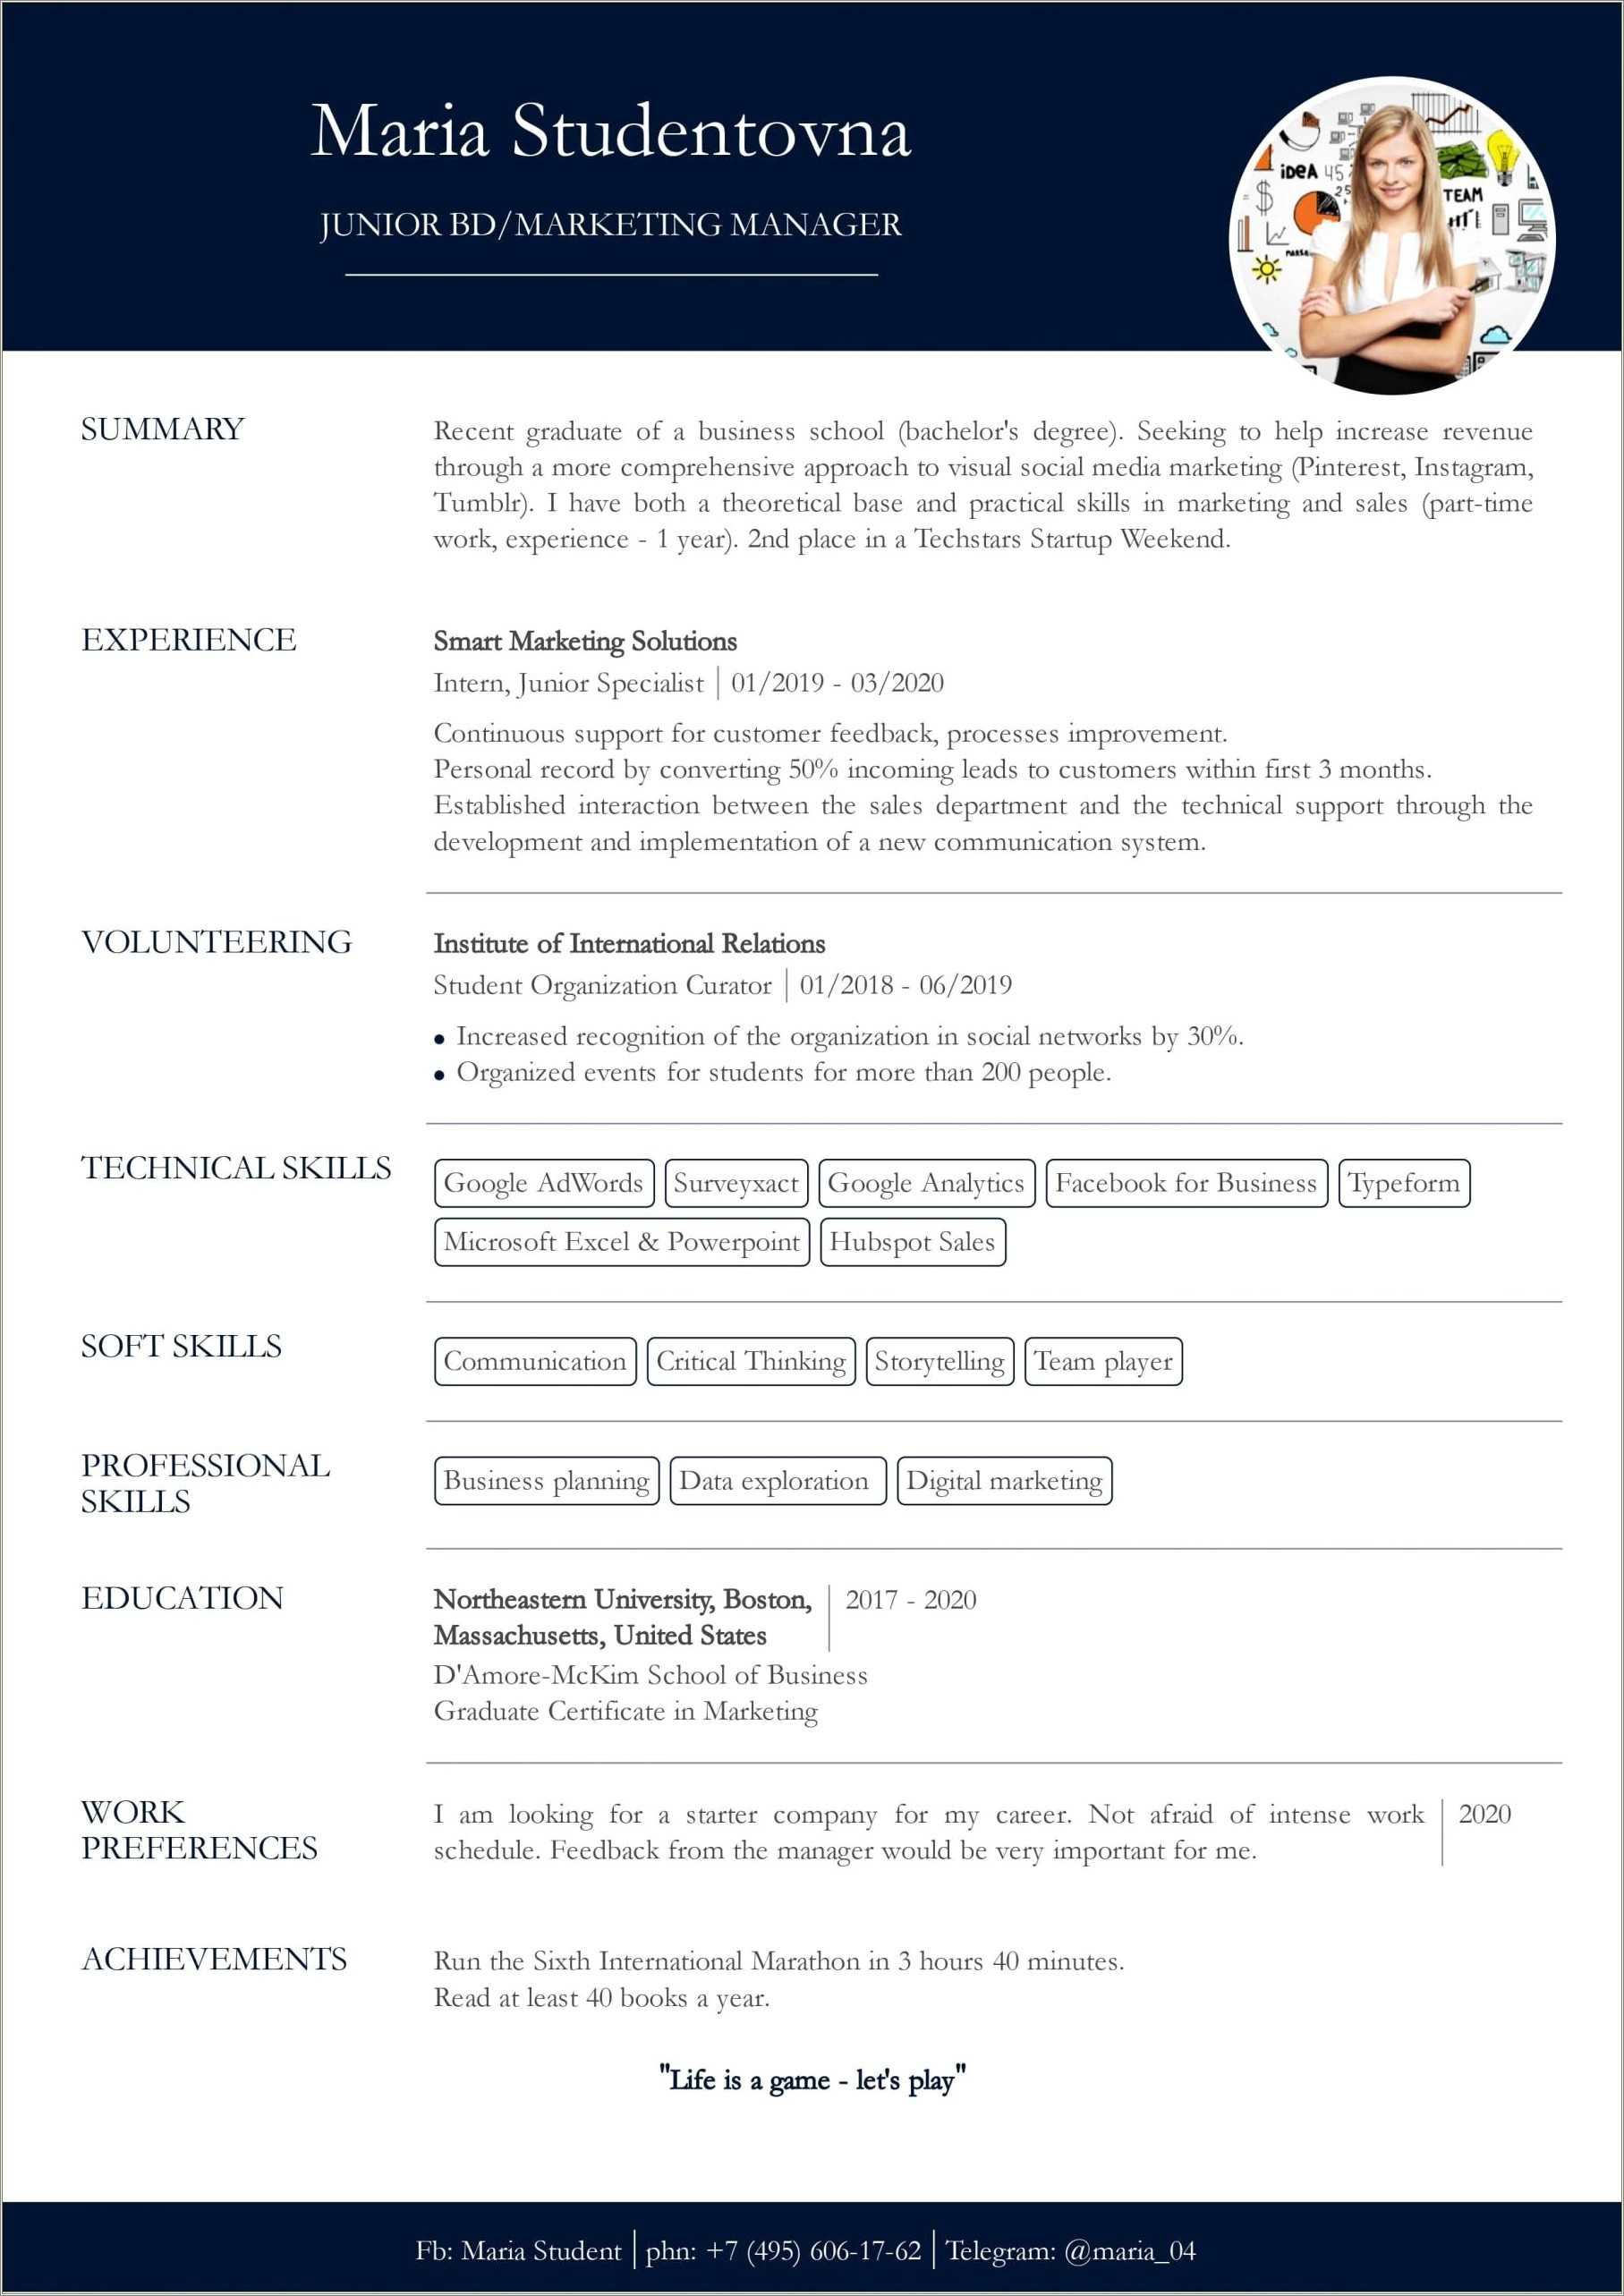 Sample Resume For Tourism Students